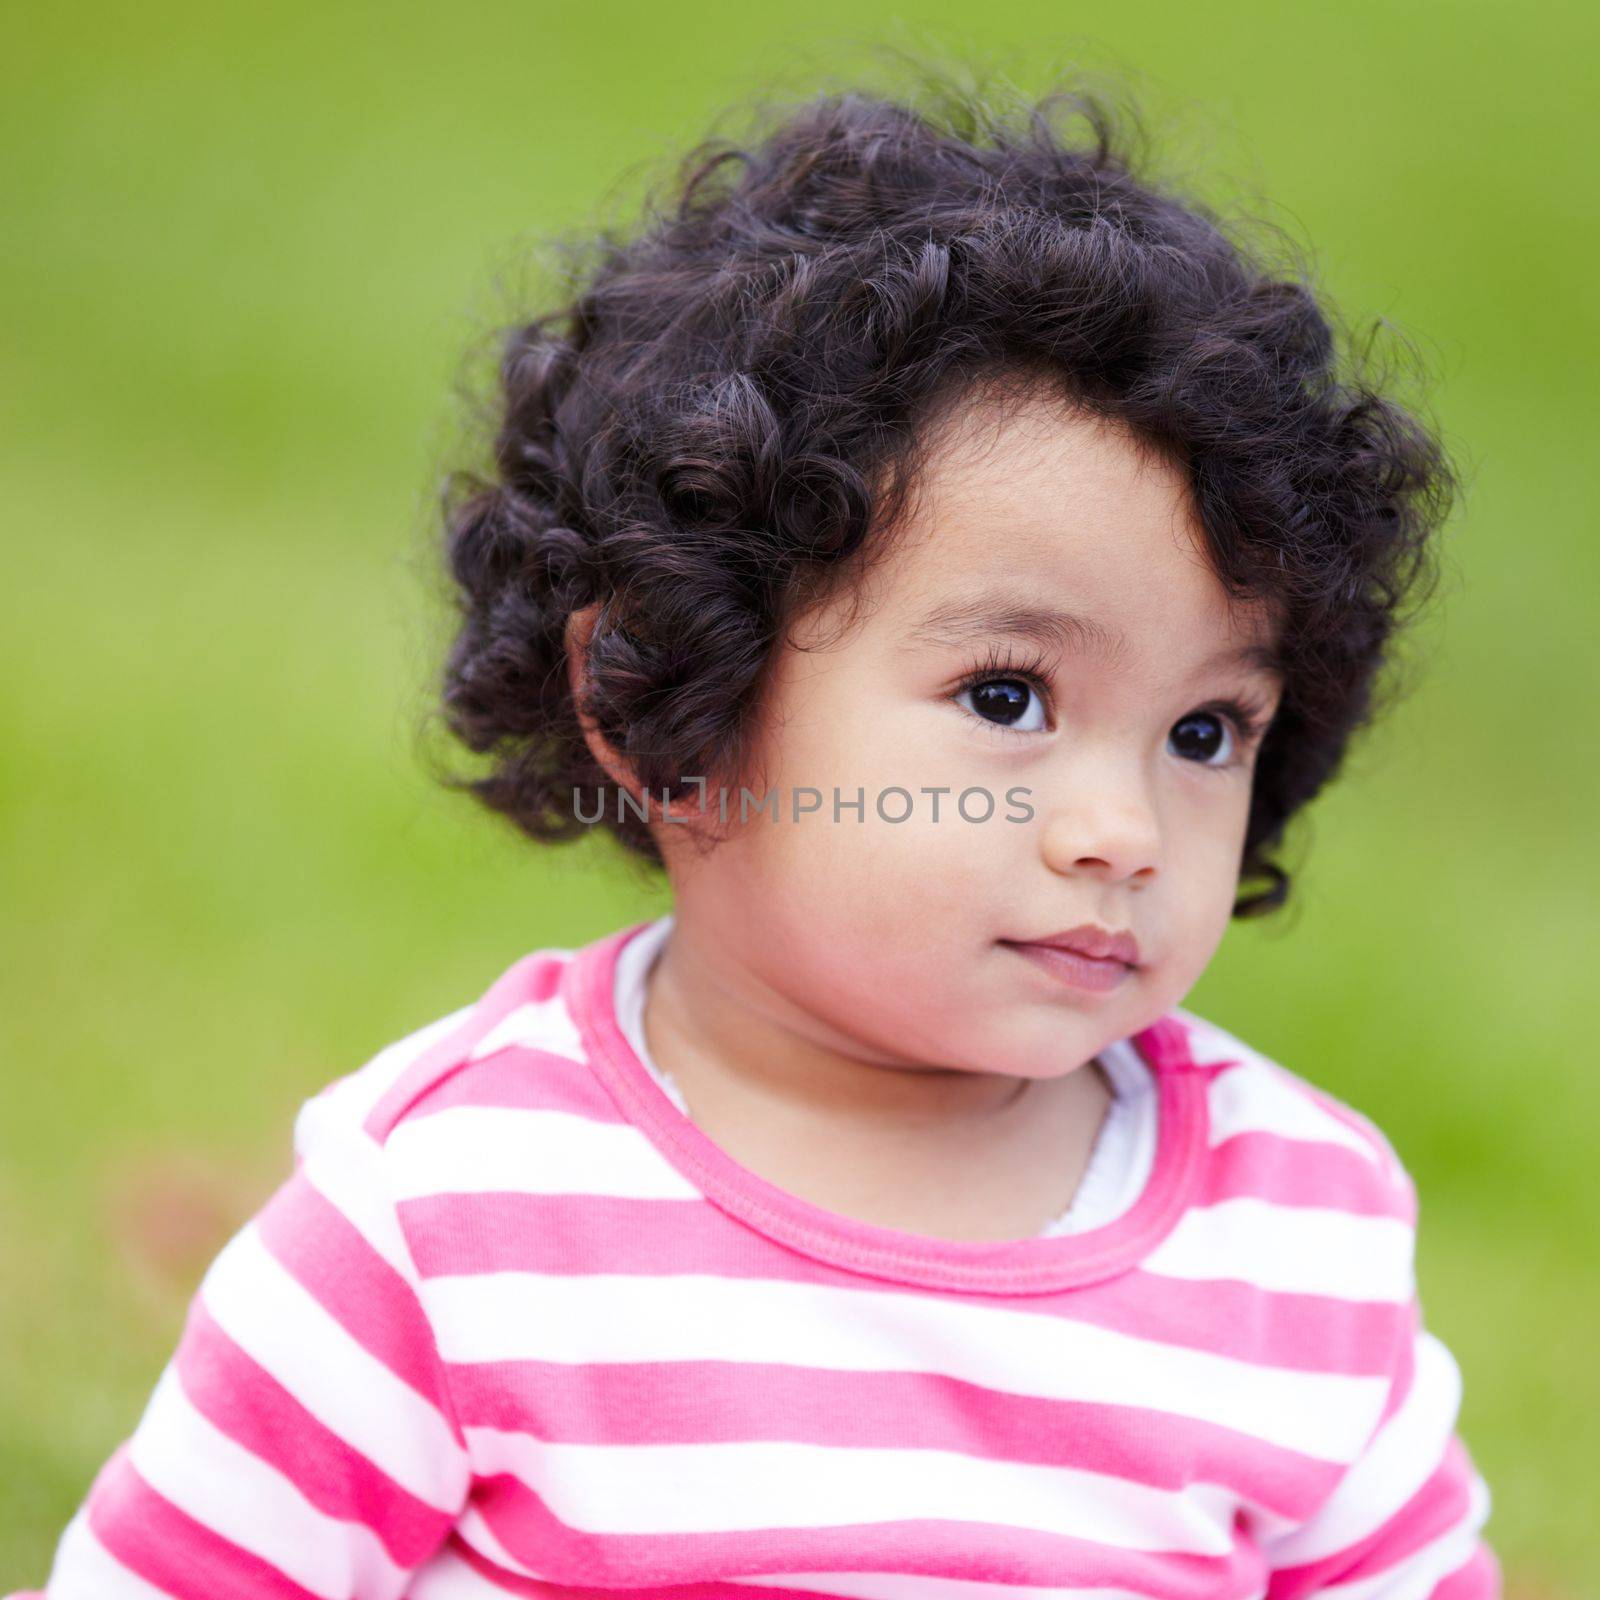 Shes a cutie. Adorable little girl looking thoughtfully away